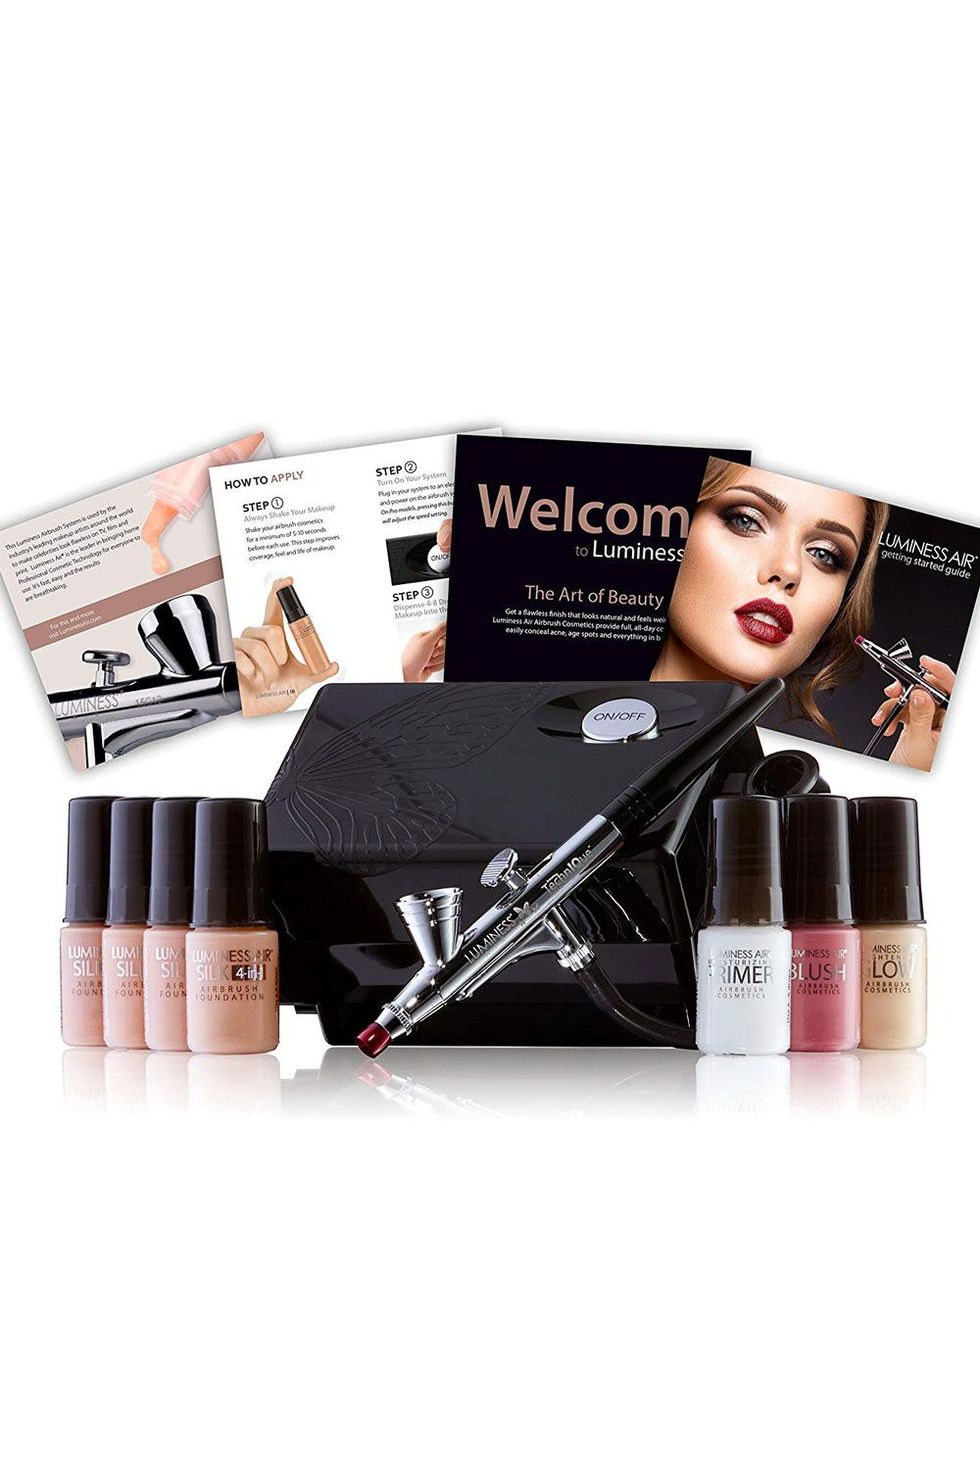 15 Best Airbrush Makeup Kits For